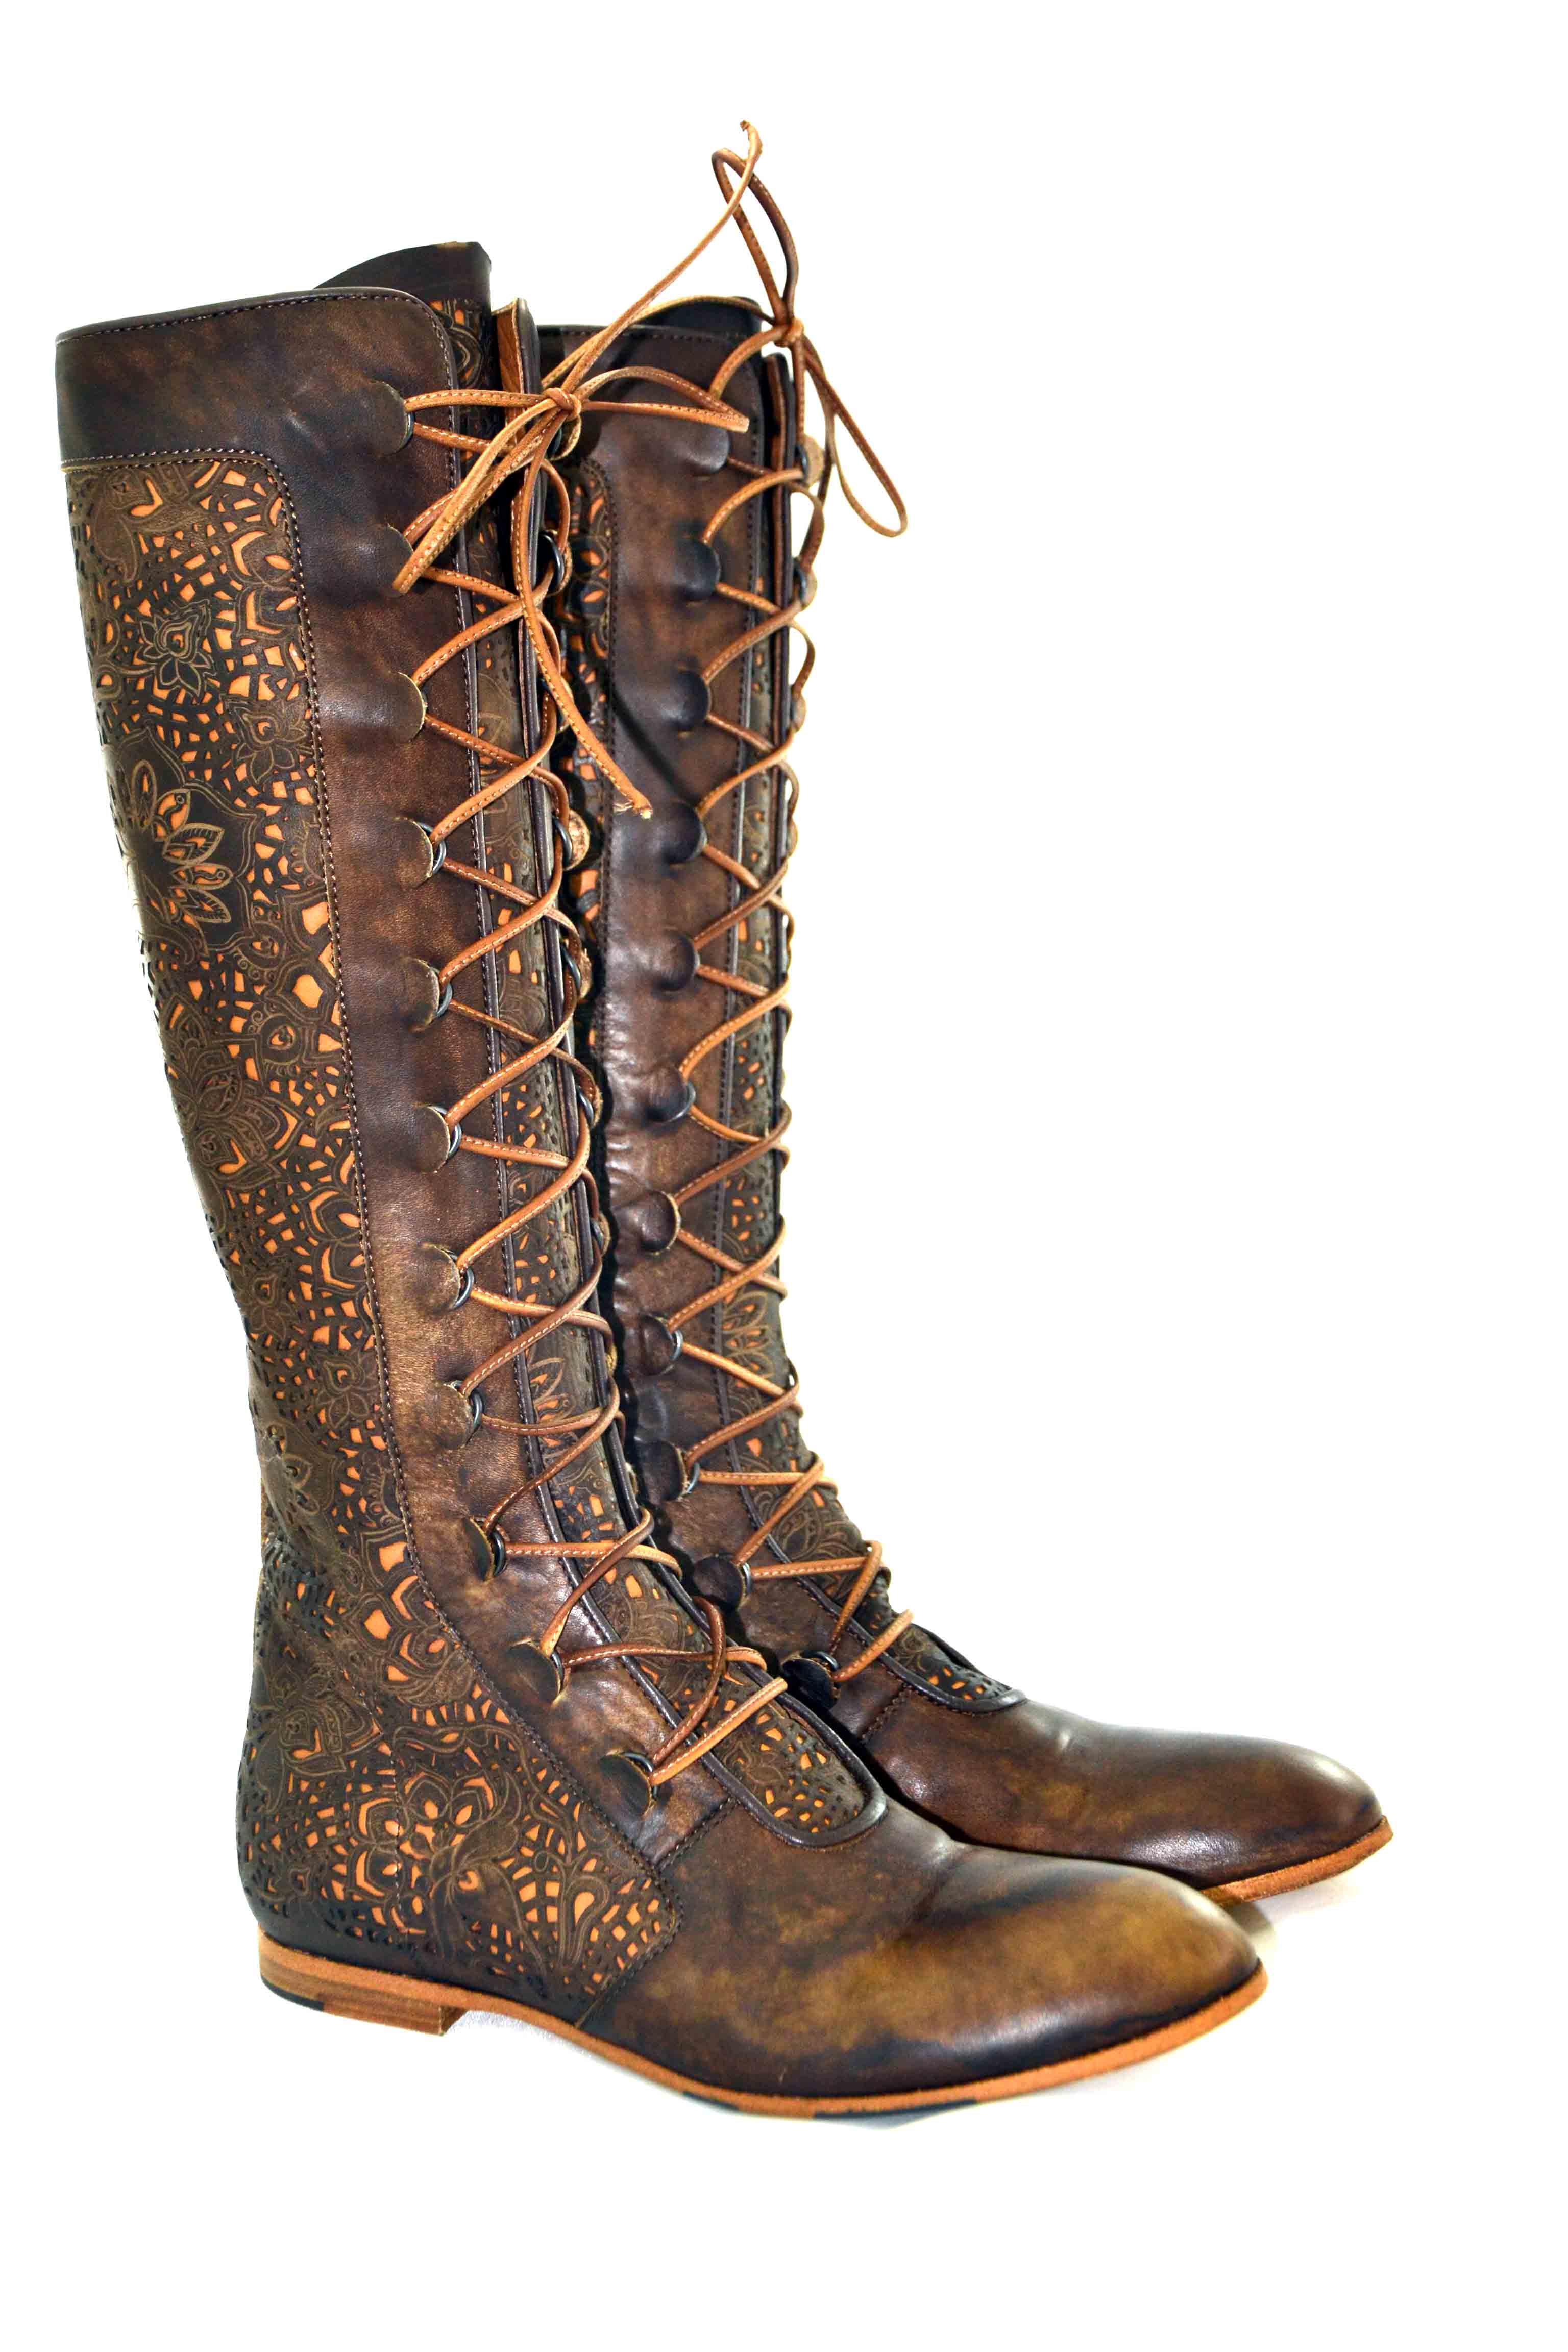 LAST PAIR 37- PERFORATED LEATHER CHOCO SUMMER BOOTS